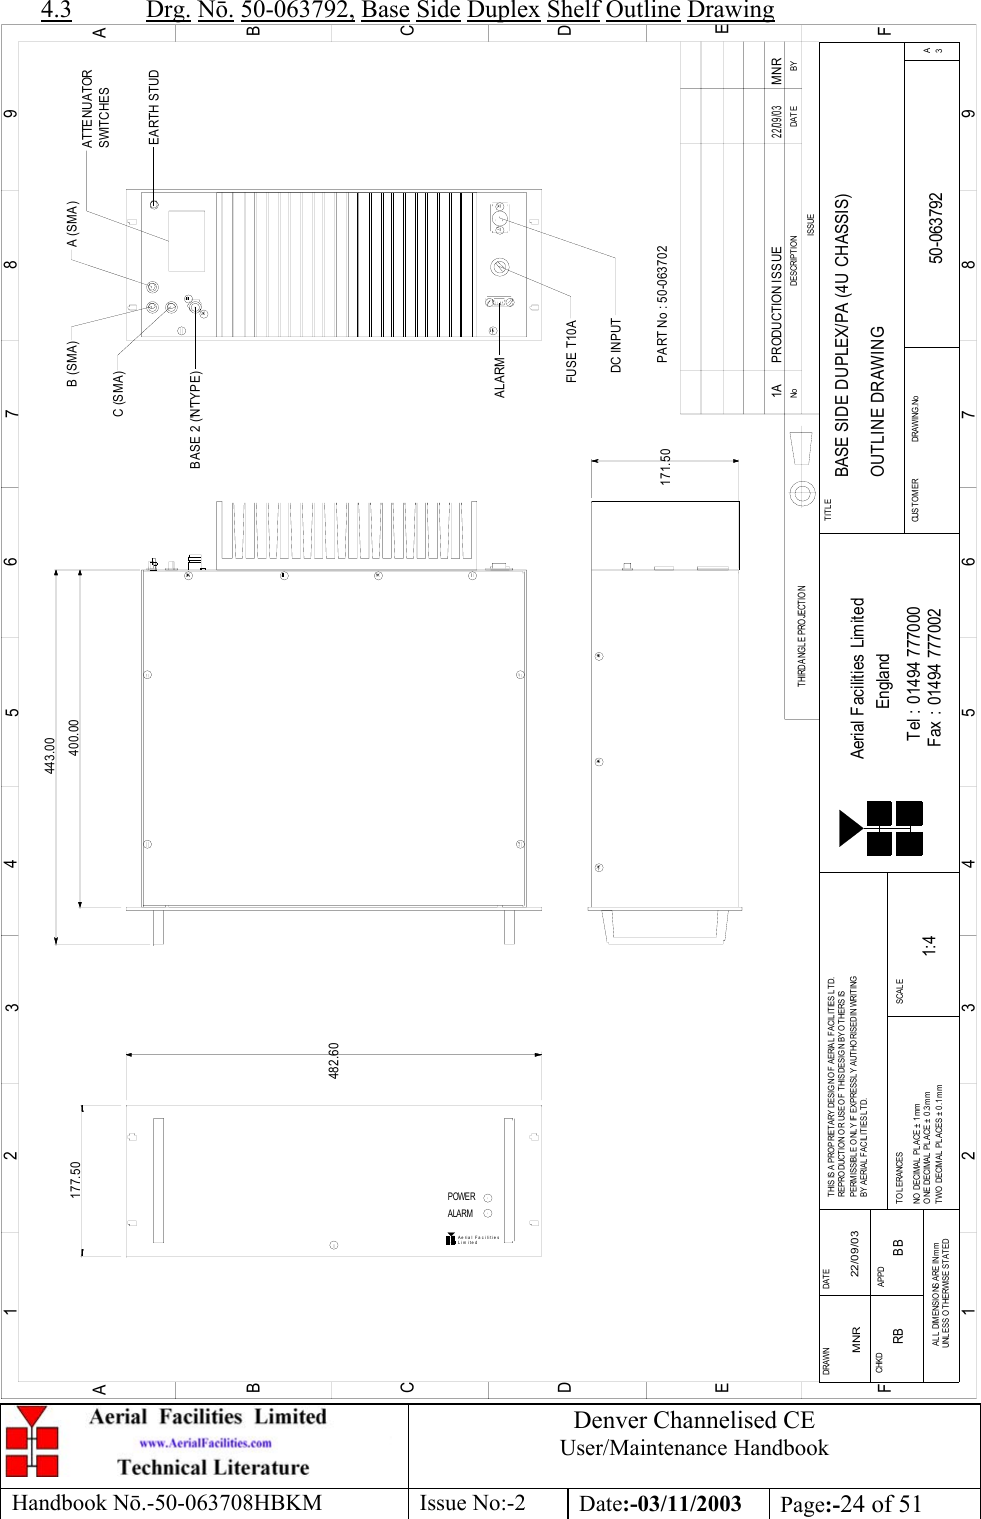 Denver Channelised CEUser/Maintenance HandbookHandbook Nō.-50-063708HBKM Issue No:-2 Date:-03/11/2003 Page:-24 of 514.3 Drg. Nō. 50-063792, Base Side Duplex Shelf Outline DrawingLim itedAe ria l Fa c i litie s177.50443.00400.00171.50482.60BYDAT EDES CRIP TIO NNoISSUETHIRD ANGL E PRO JECTION123456789ABCDEF1 23456789ABCDEFFax : 01494 777002Tel : 01494 777000Aerial Facilities LimitedTHIS IS A PROPRIETARY DESIGN OF AERIAL  FACILITIES L TD.REP RO DUCT IO N O R USE O F THIS DESIG N BY O THERS ISPERMISSIBLE O NL Y IF EXPRESSLY AUTHORISED IN WRITINGBY AERIAL  FACIL ITIES LTD.NO  DECIM AL  PL ACE  ±  1 mmONE DECIMAL  PL ACE ± 0.3mmTWO  DECIMAL  PL ACES ± 0.1mmAL L  DIMENSIO NS ARE IN m mUNL ESS OTHERWISE STATEDCHKDDRAWN        APPDDAT ET O L ERANCES SCALEEnglandCUST O MER                      DRAWING .NoTITLE3ABASE SIDE DUPLEX/PA (4U CHASSIS)OUTLINE DRAWING50-0637921:41AMNR 22/09/03PRODUCTION ISSUE22/09/03MNREARTH STUDATTENUATORSWITCHESA (SMA)B (SMA)C (SMA)BASE 2 (&apos;N&apos;TYPE)ALARMFUSE T10ADC INPUTPART No : 50-063702ALARMPOWERRB BB